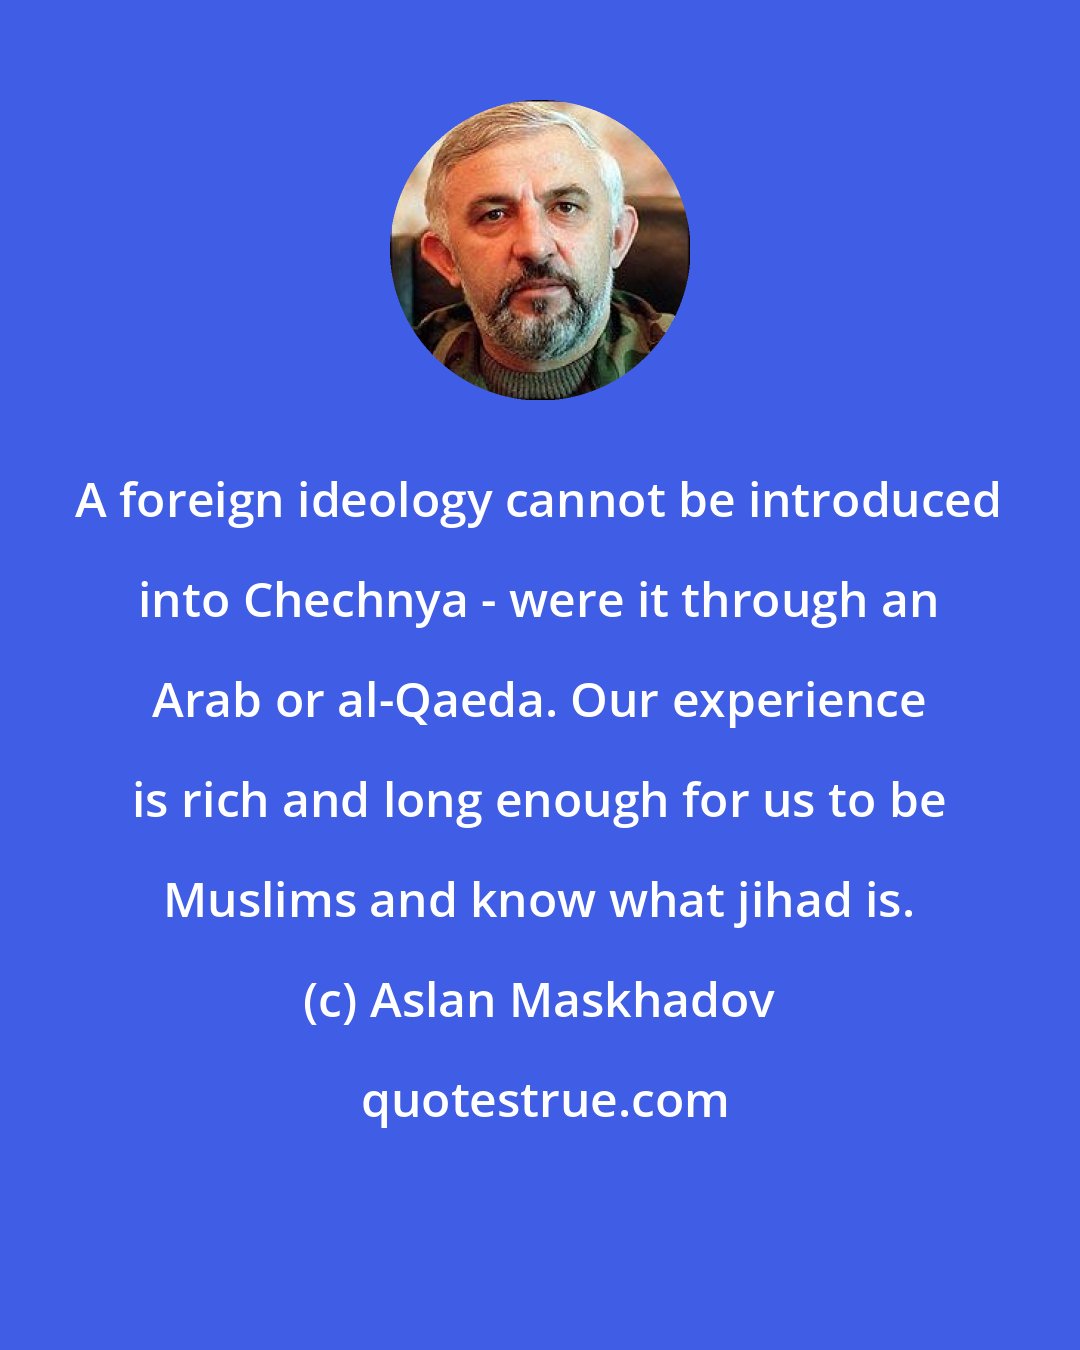 Aslan Maskhadov: A foreign ideology cannot be introduced into Chechnya - were it through an Arab or al-Qaeda. Our experience is rich and long enough for us to be Muslims and know what jihad is.